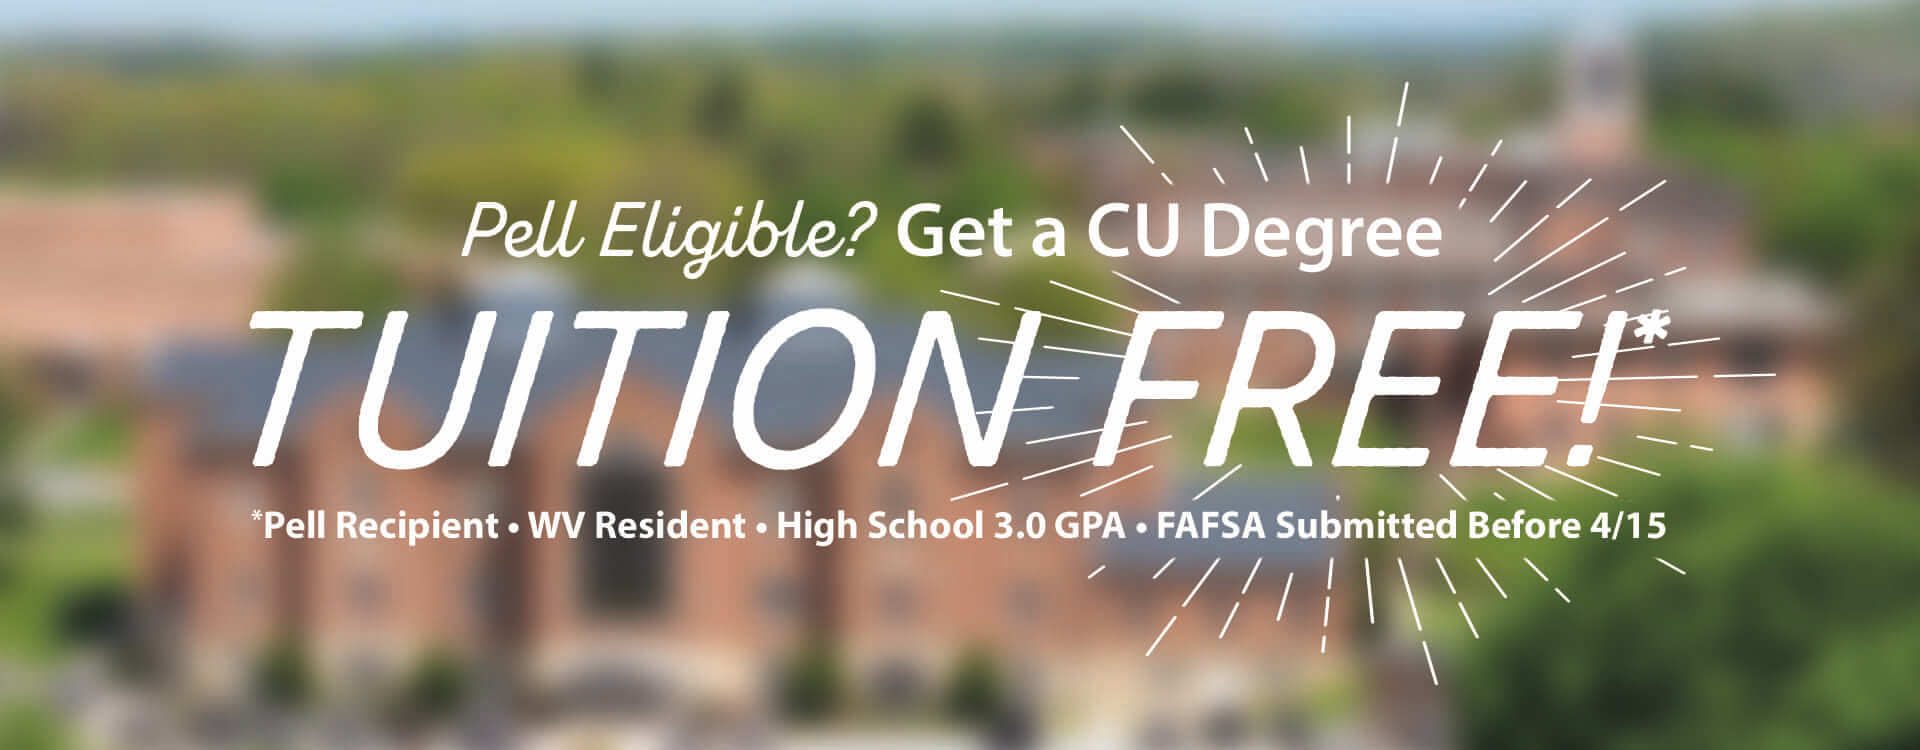 Are you Pell Grant Eligible? Get get a CU degree Tuition Free!* *you must be a pell recipient, a west virginia resident, have a 3.0 high school GPA, and have submitted your FAFSA before April 15. Click here to learn more about our CU Free program